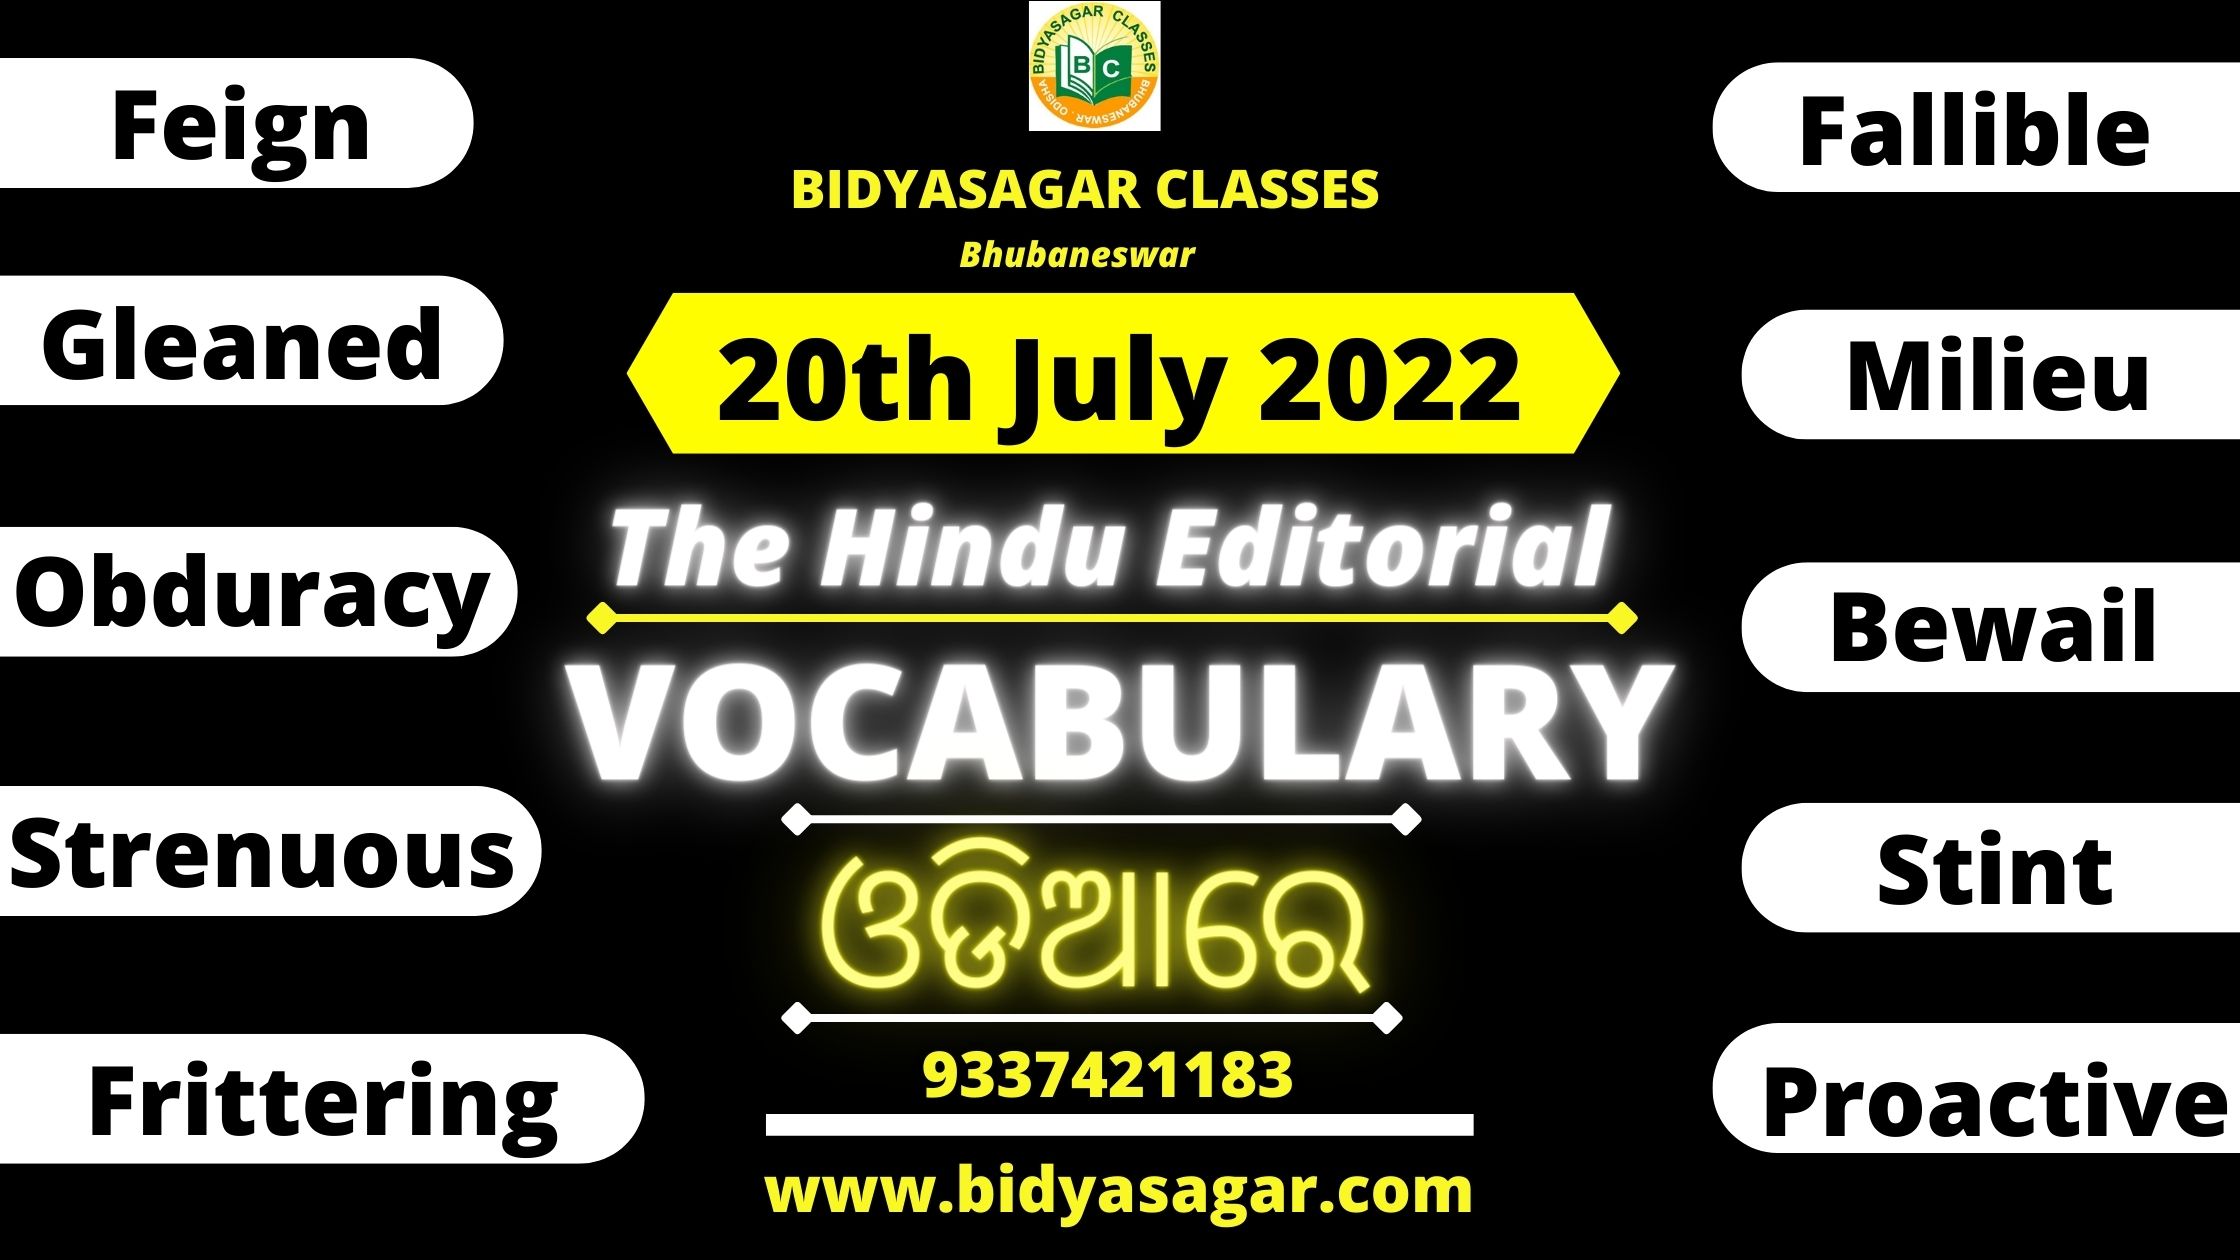 The Hindu Editorial Vocabulary of 20th July 2022